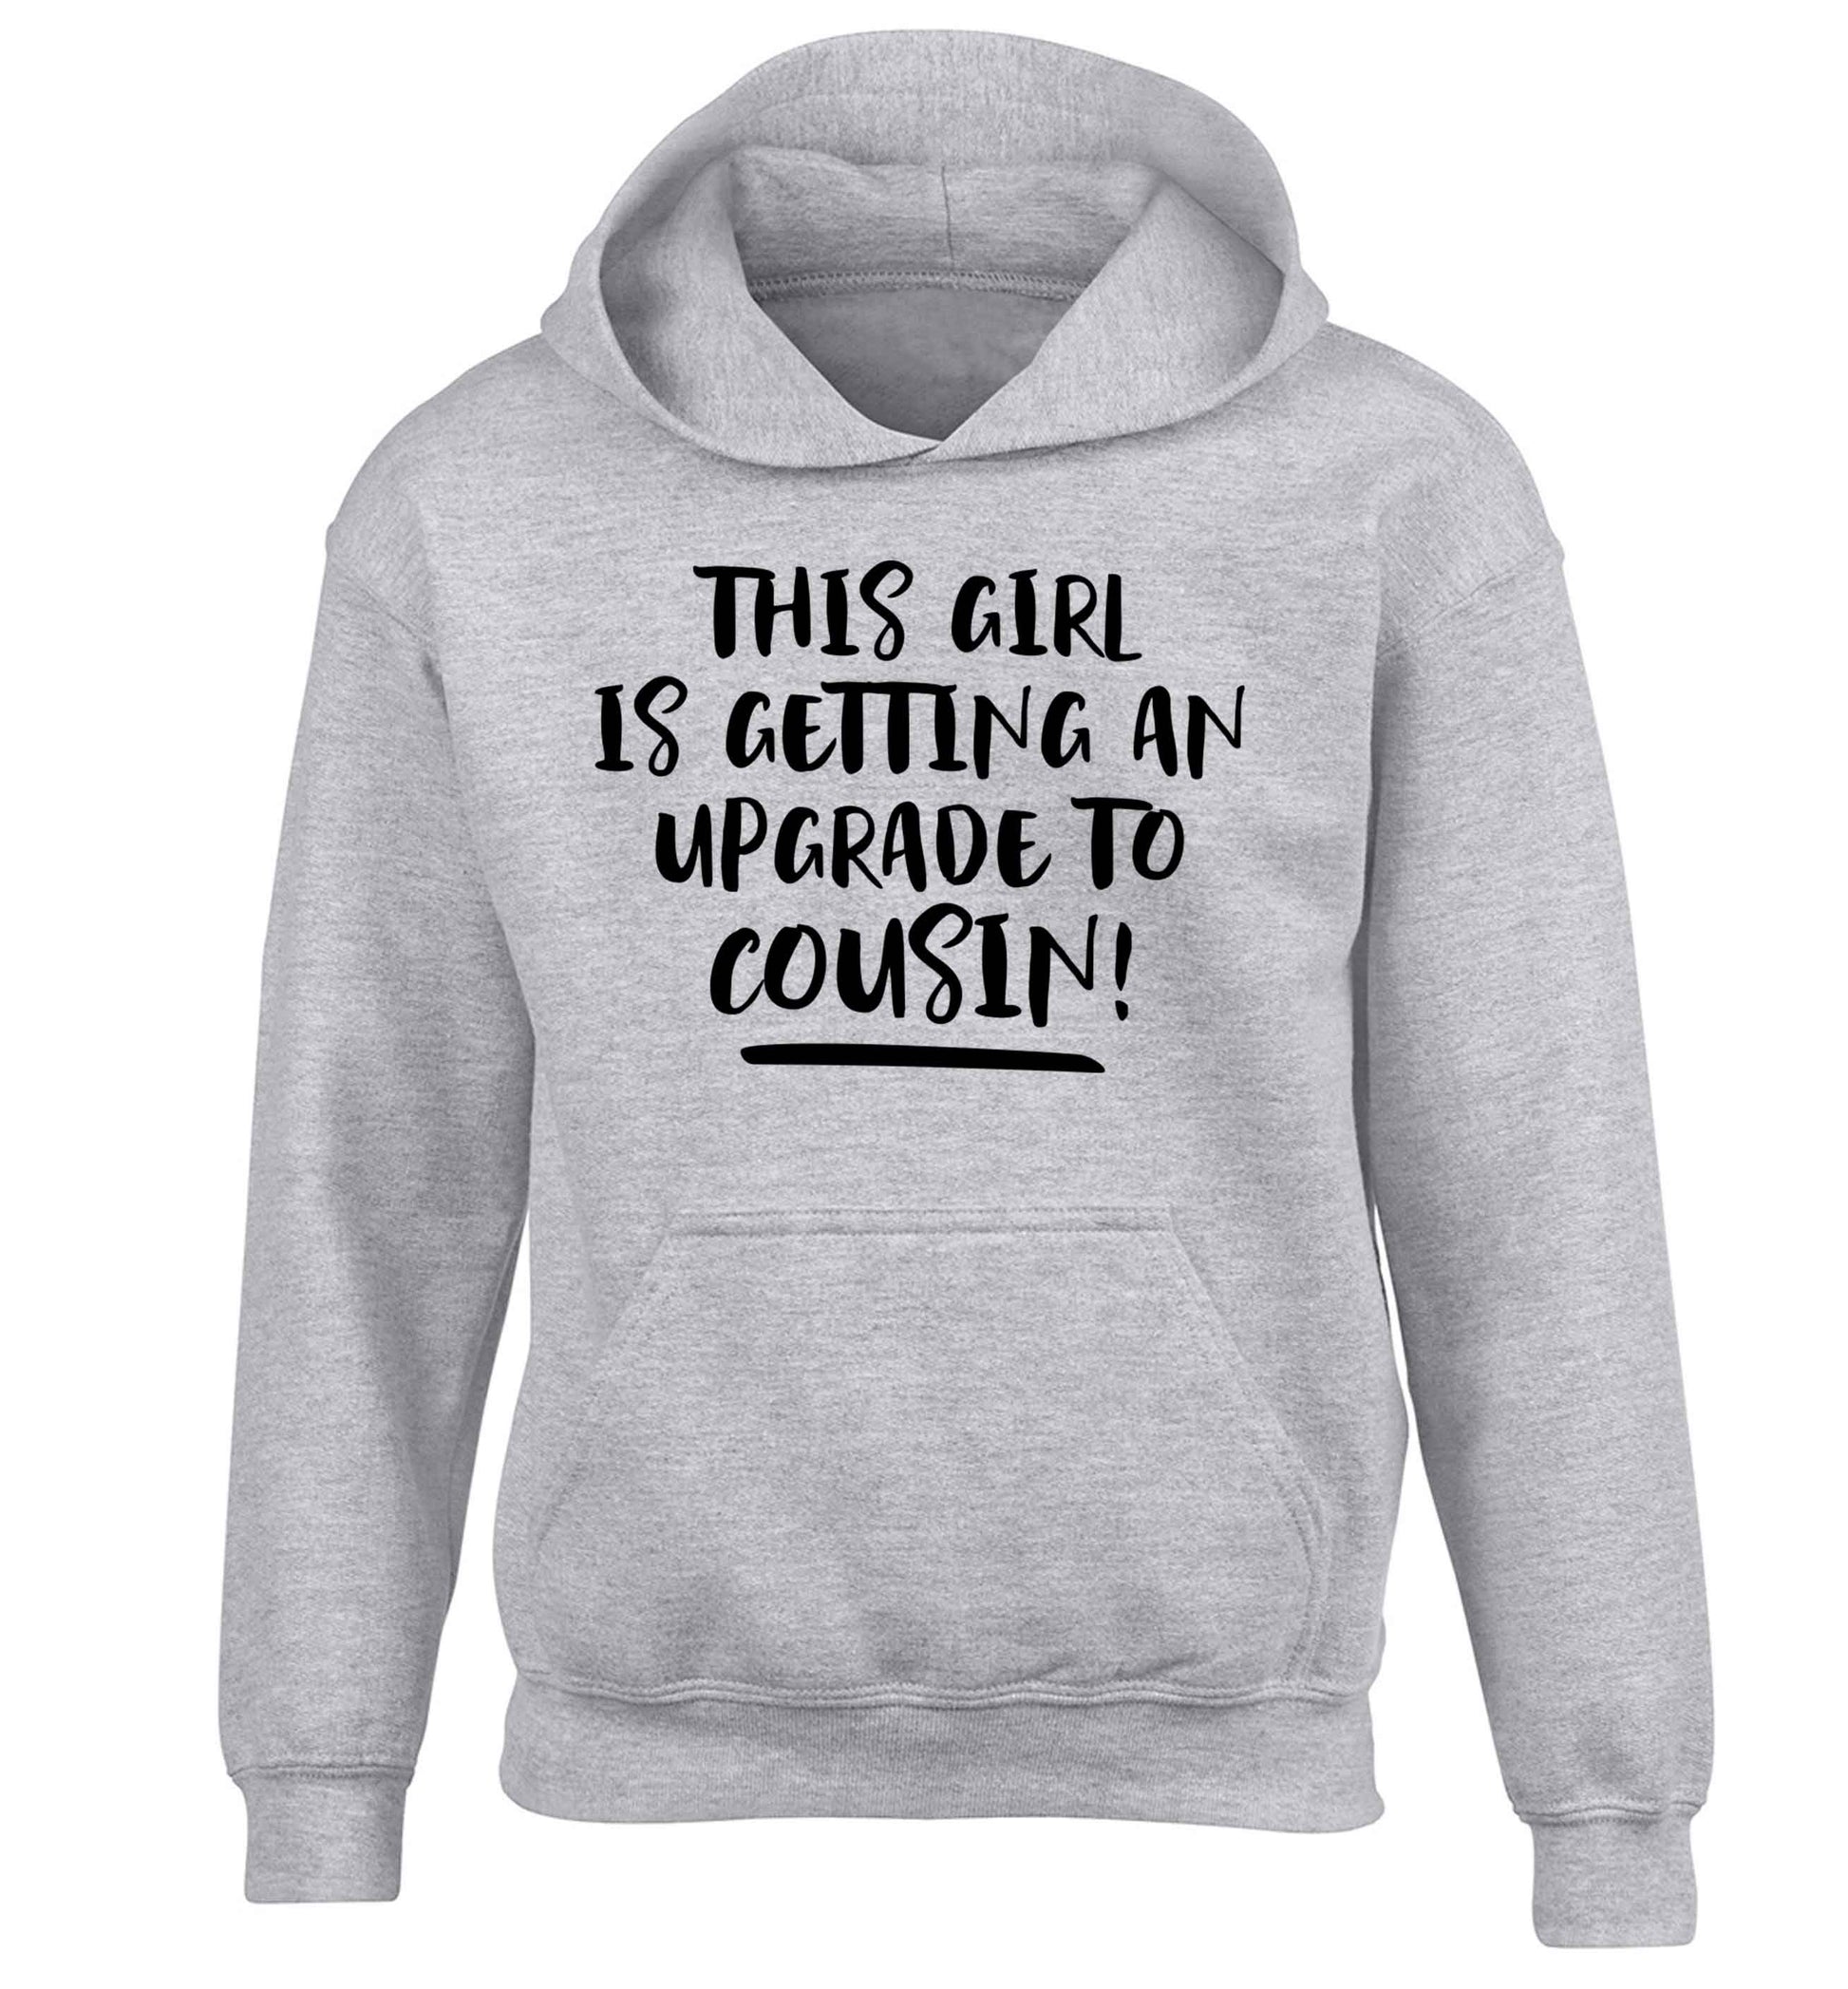 This girl is getting an upgrade to cousin! children's grey hoodie 12-13 Years